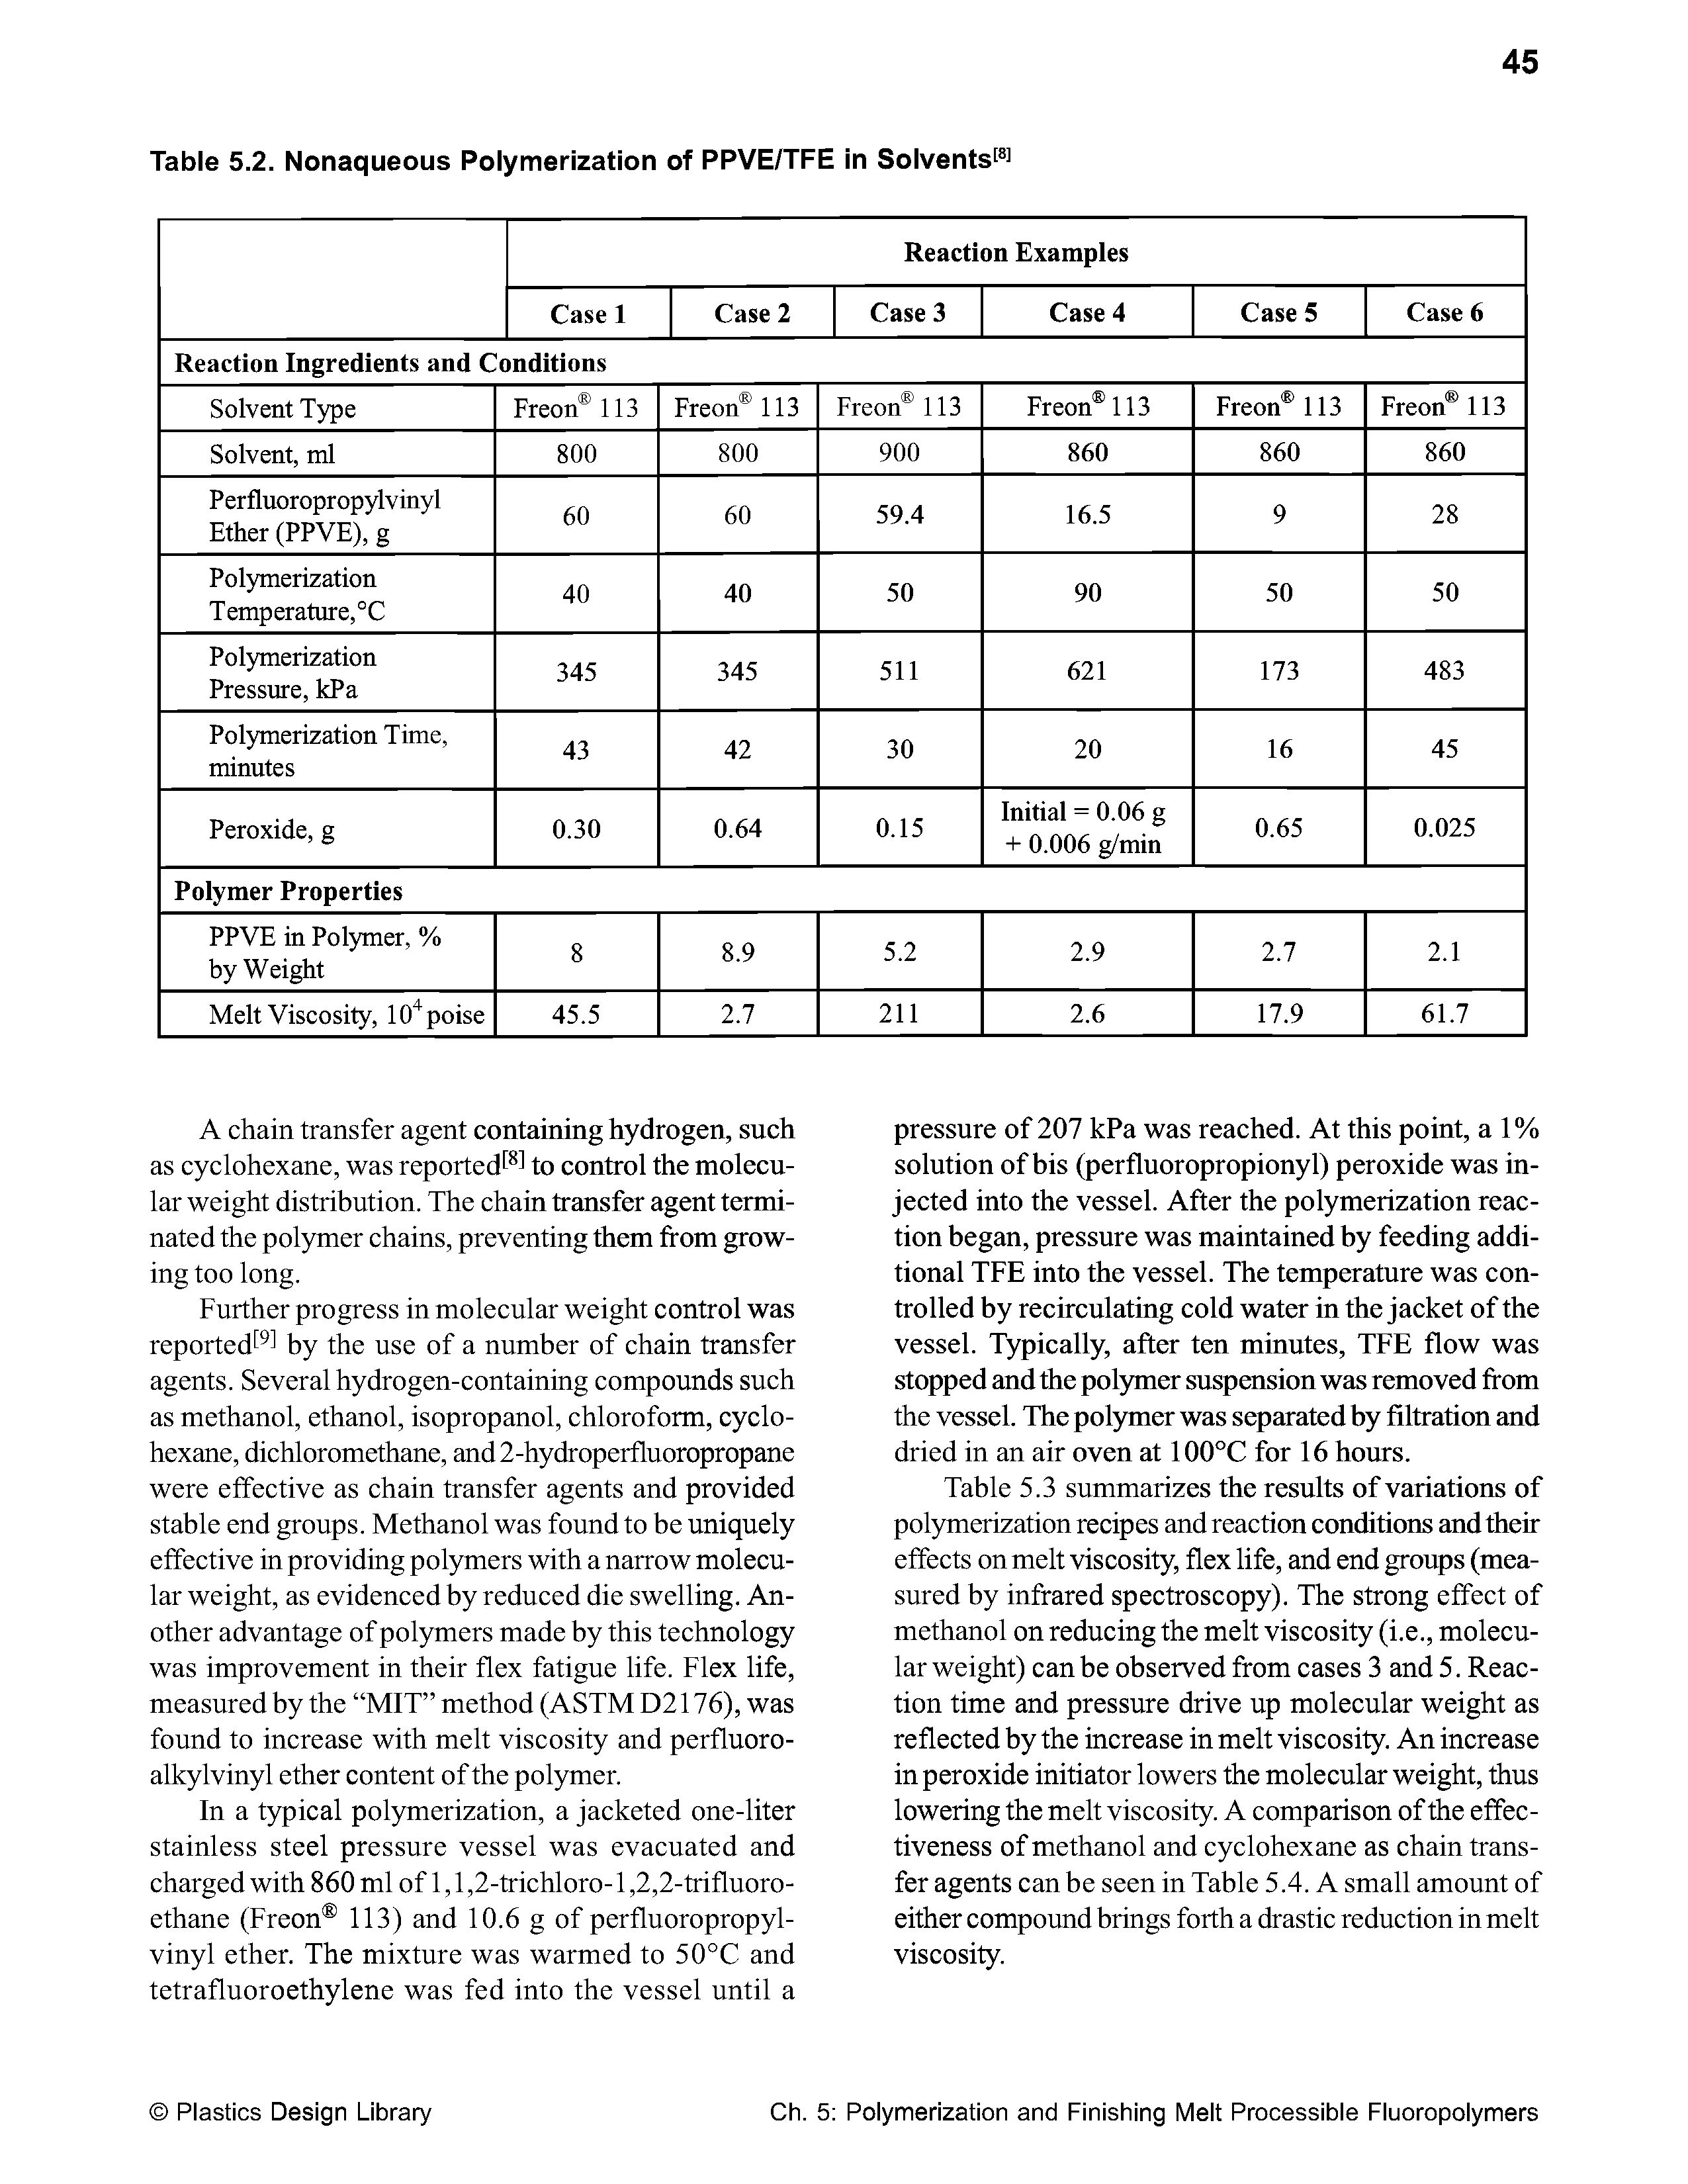 Table 5.3 summarizes the results of variations of polymerization recipes and reaction conditions and their effects on melt viscosity, flex life, and end groups (measured by infrared spectroscopy). The strong effect of methanol on reducing the melt viscosity (i.e., molecular weight) can be observed from cases 3 and 5. Reaction time and pressure drive up molecular weight as reflected by the increase in melt viscosity. An increase in peroxide initiator lowers the molecular weight, thus lowering the melt viscosity. A comparison of the effectiveness of methanol and cyclohexane as chain transfer agents can be seen in Table 5.4. A small amount of either compound brings forth a drastic reduction in melt viscosity.